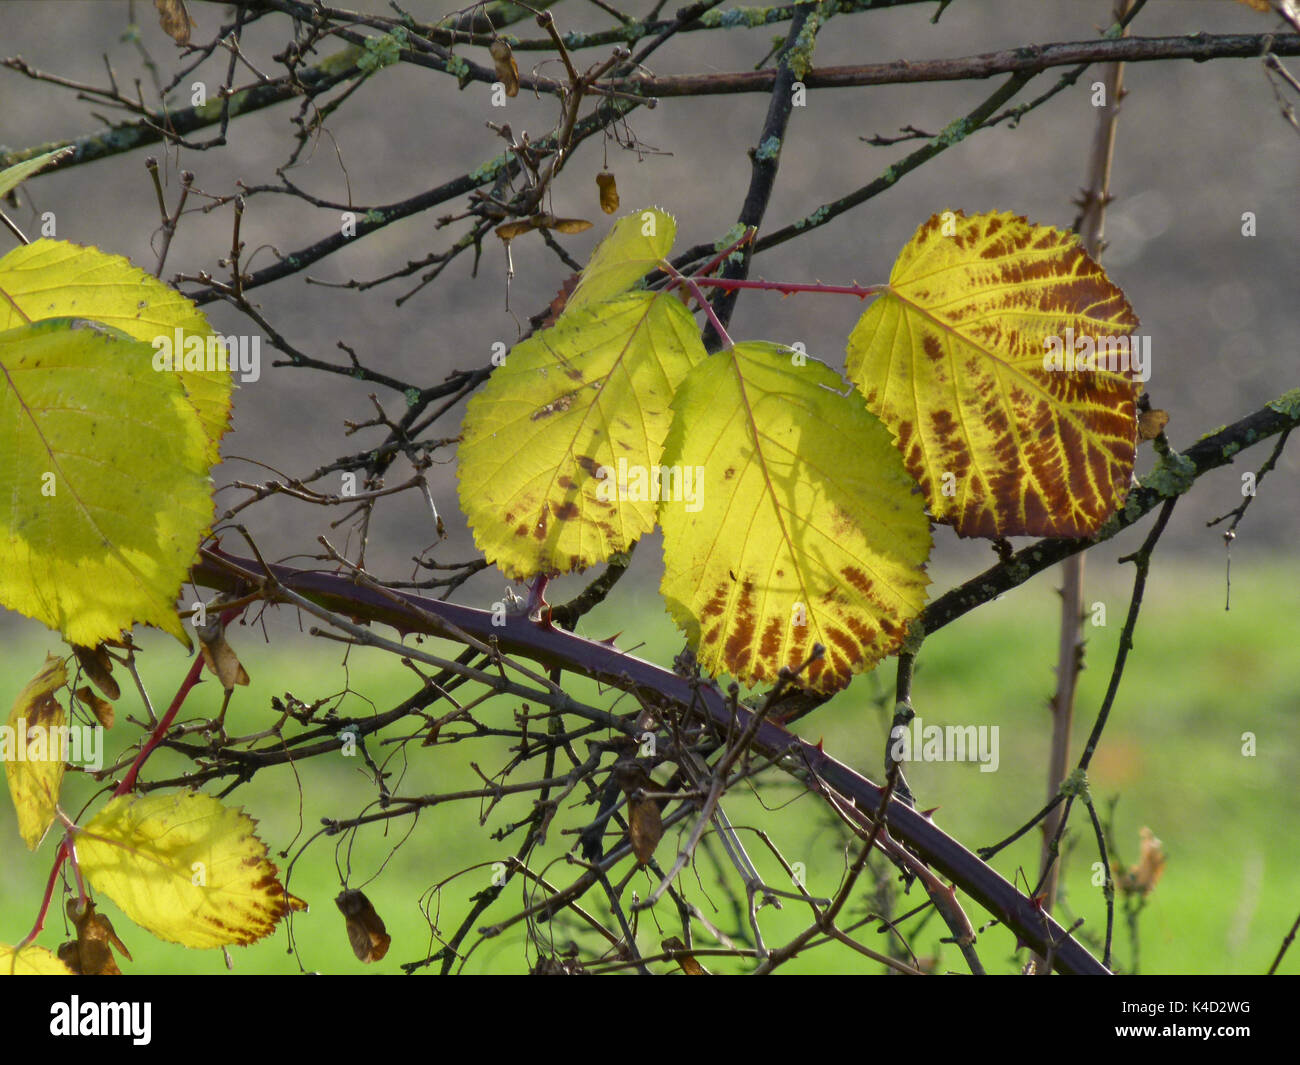 Nature Still Shows Itself From Its Colorful Side, Colorful Autumn Leaves Stock Photo